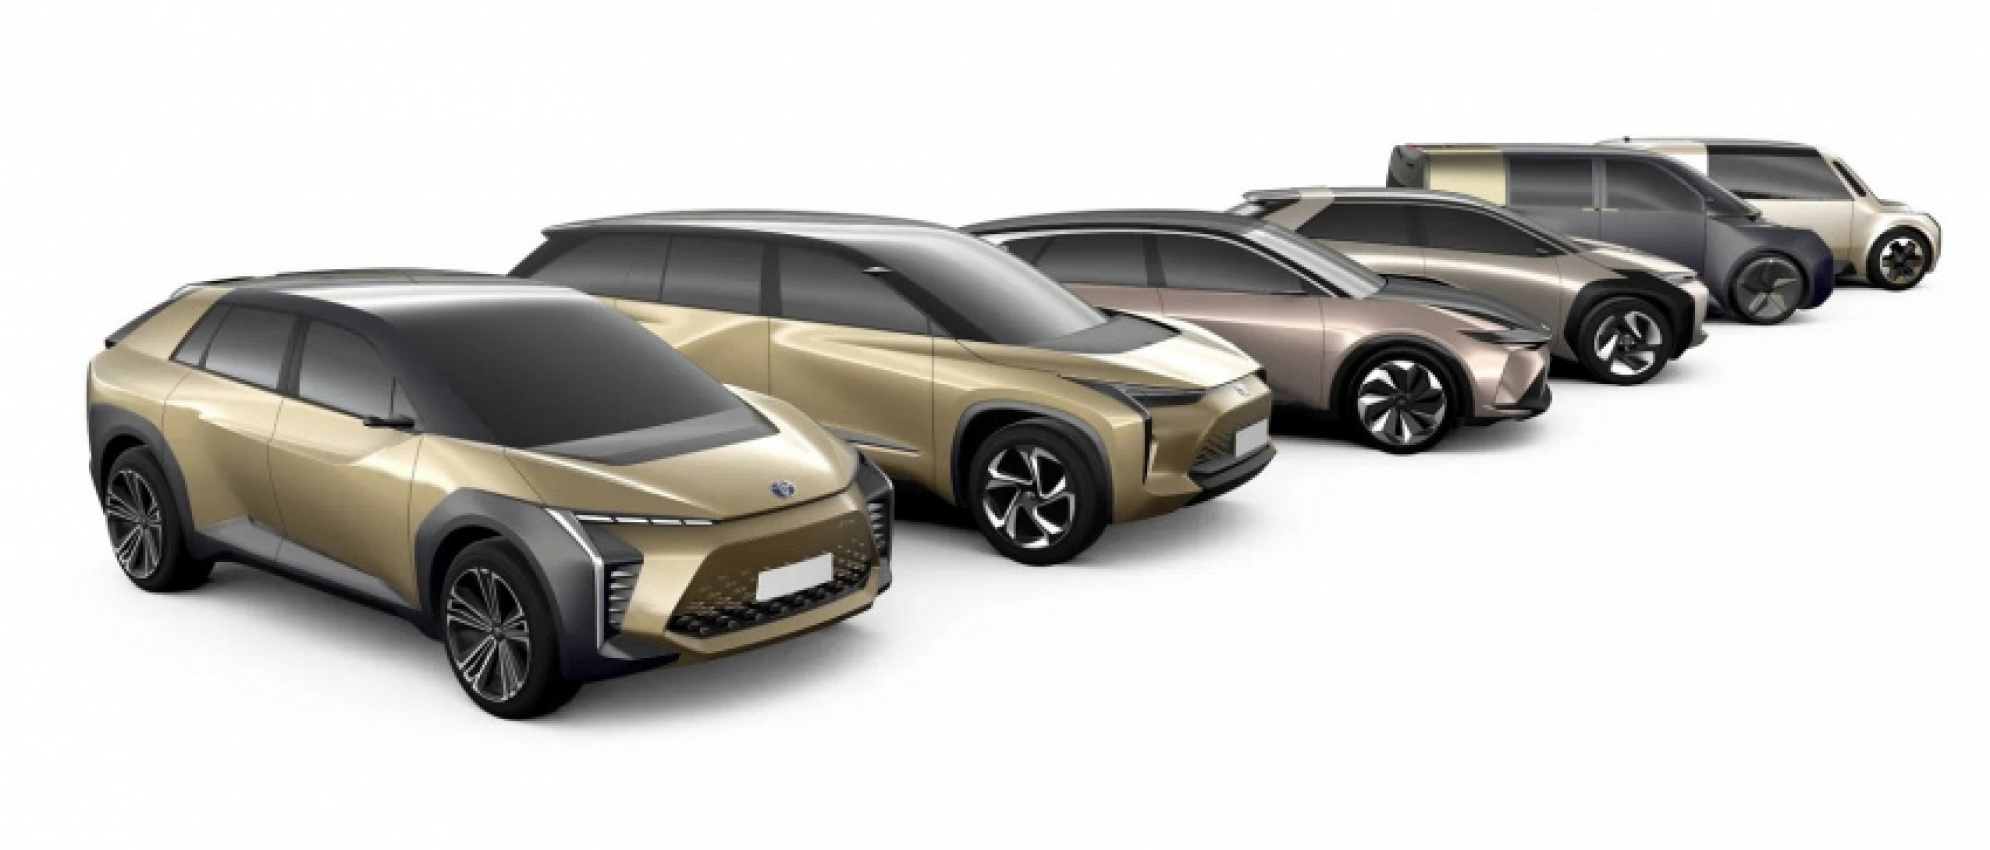 autos, car brands, cars, electric vehicle, toyota, automotive, battery electric vehicle, cars, fuel cell, hybrid electric vehicle, malaysia, plug in hybrid, toyota motor corporation, umw toyota motor, umw toyota motor to invest in production of hybrid electric vehicles